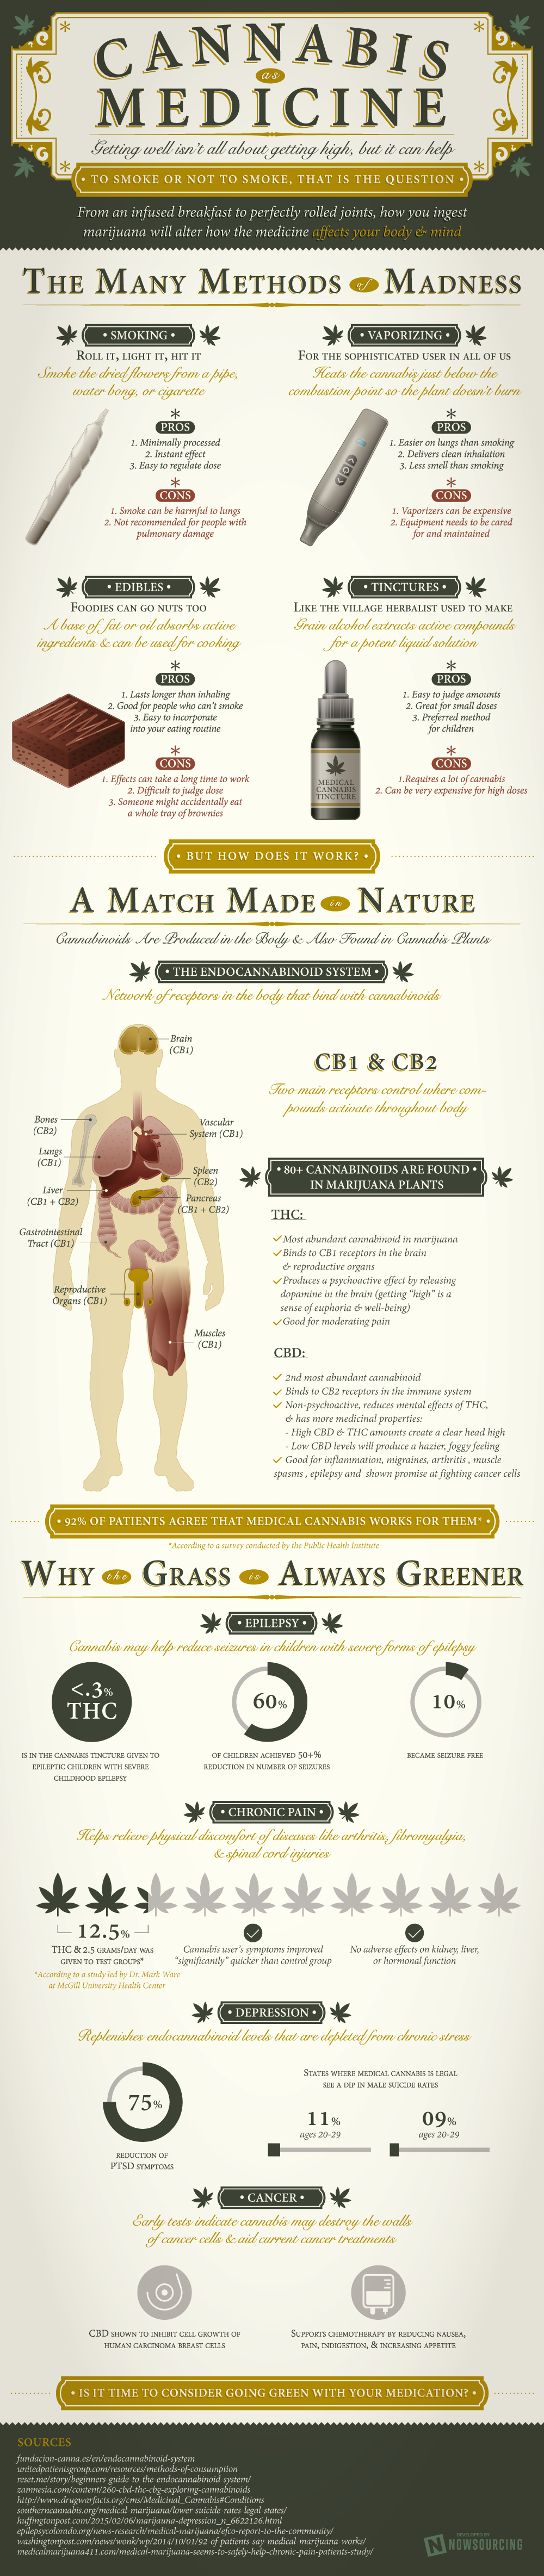 medical cannabis infographic